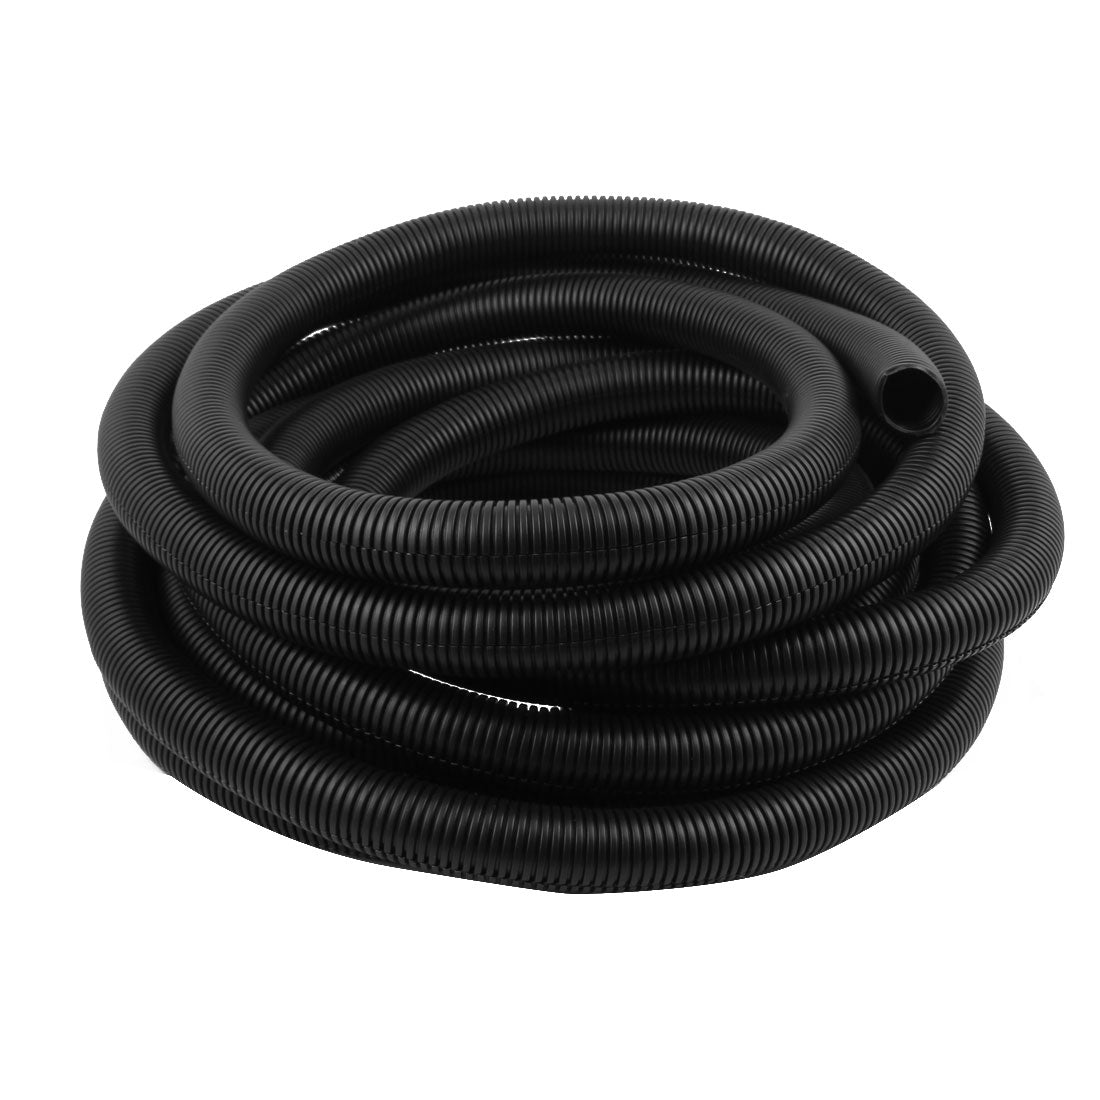 uxcell Uxcell 10 M 29 x 34.5 mm Plastic Corrugated Conduit Tube for Garden,Office Black